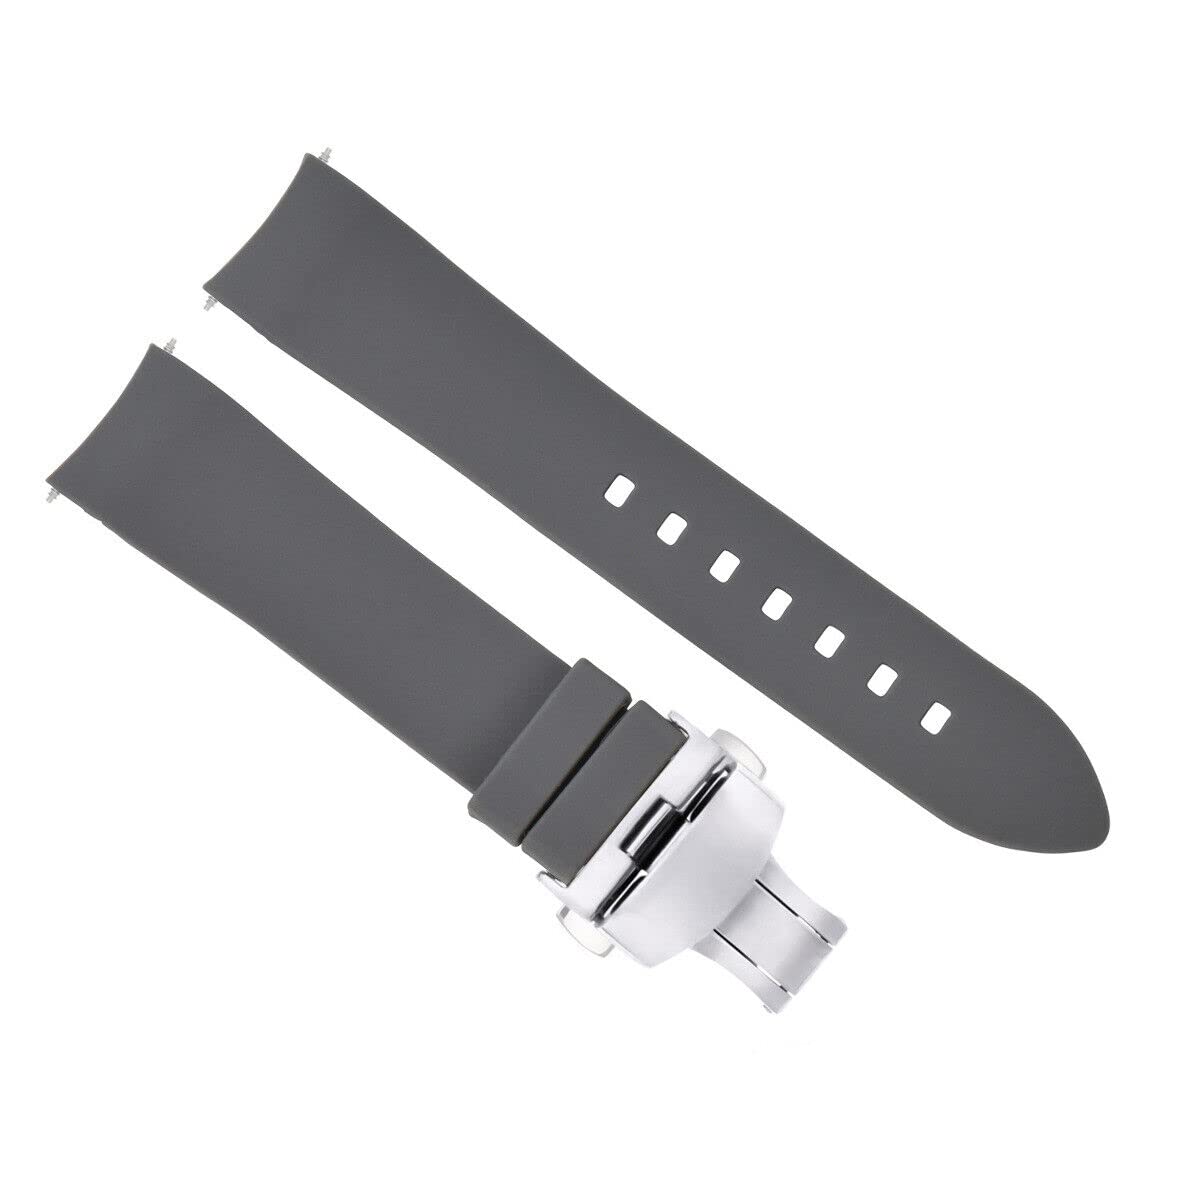 Ewatchparts CURVED END SILICONE WATCH BAND RUBBER STRAP 18MM 19MM,20MM 21MM 22MM 24MM +CLASP Black With Silver - 18mm